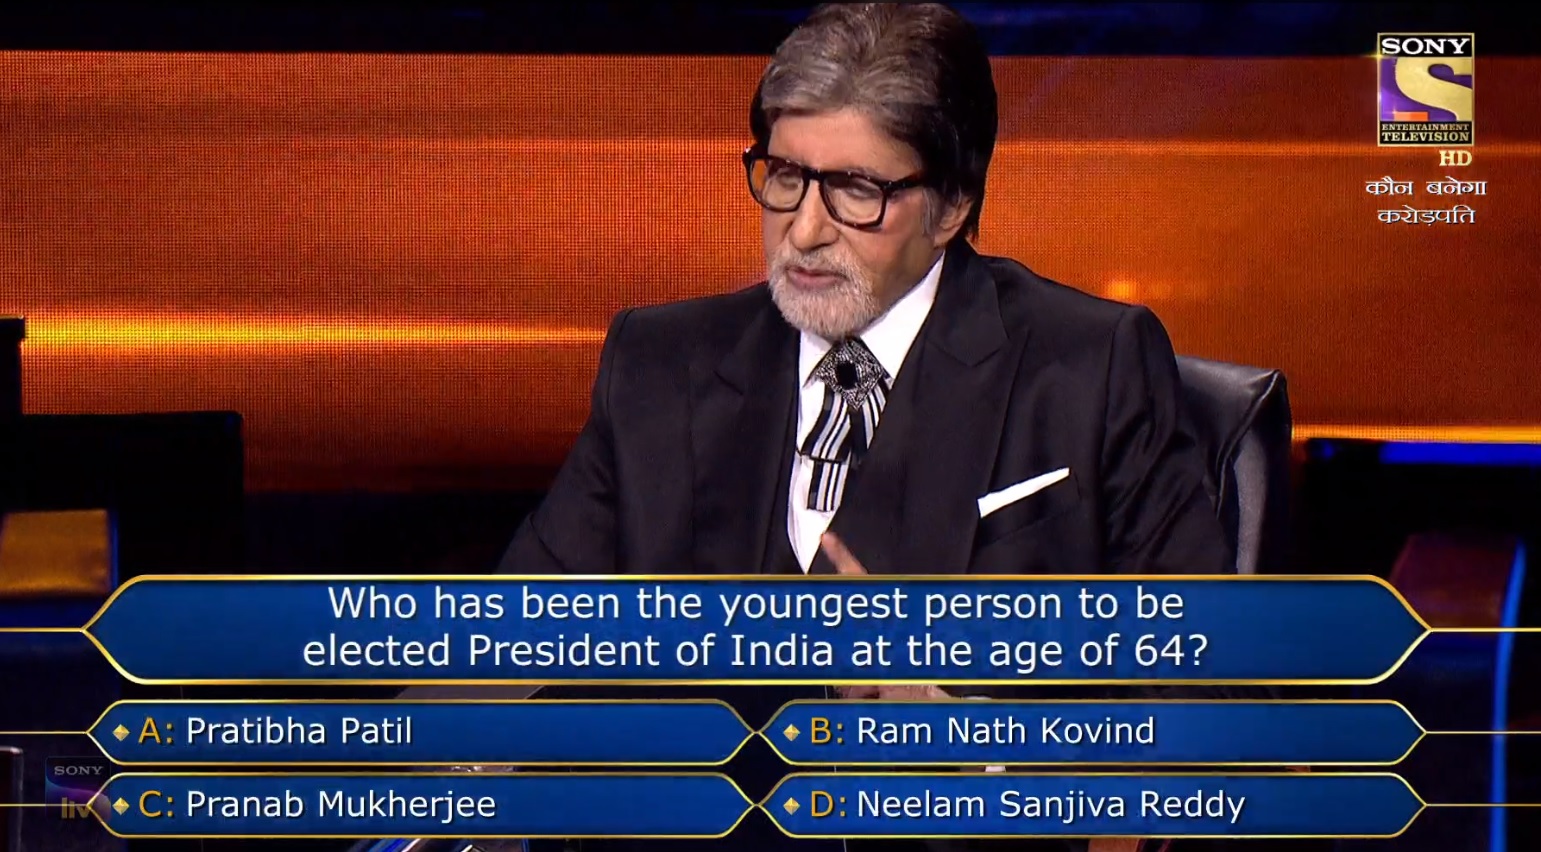 Ques : Who has been the youngest person to be elected President of India at the age of 64?